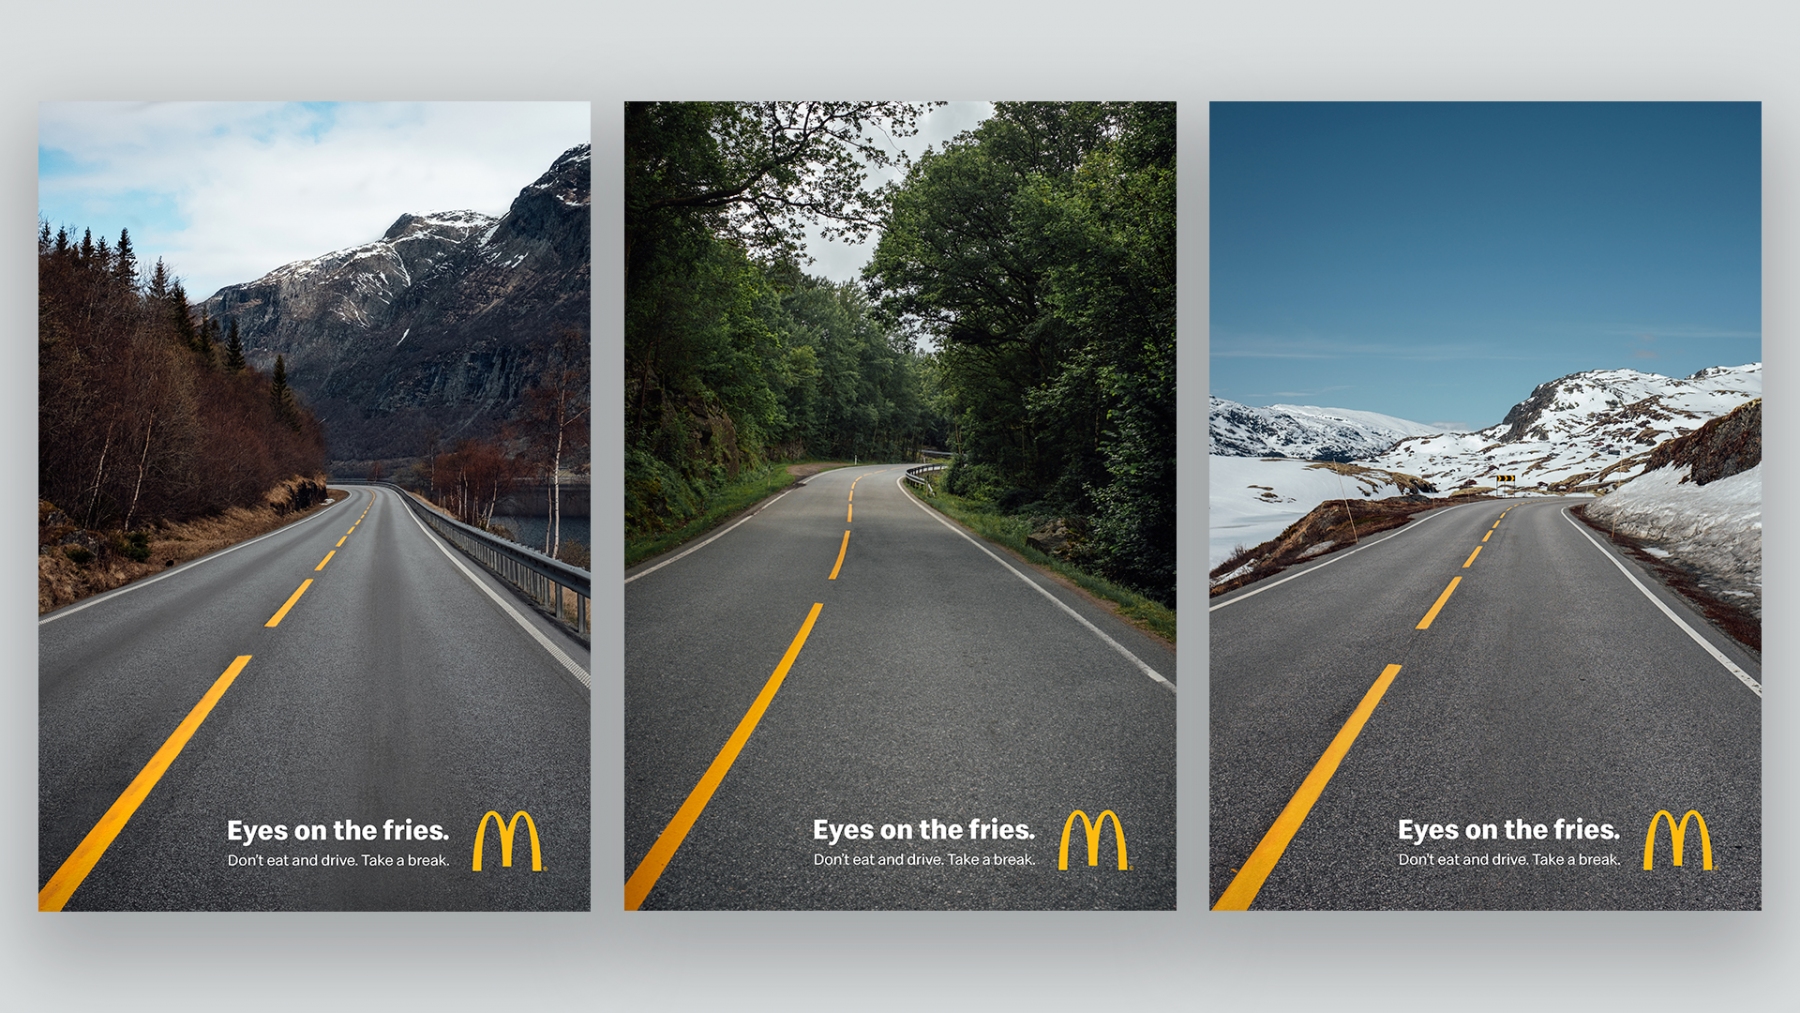 McDonalds-Fries-Norway-Road-Safety-1a